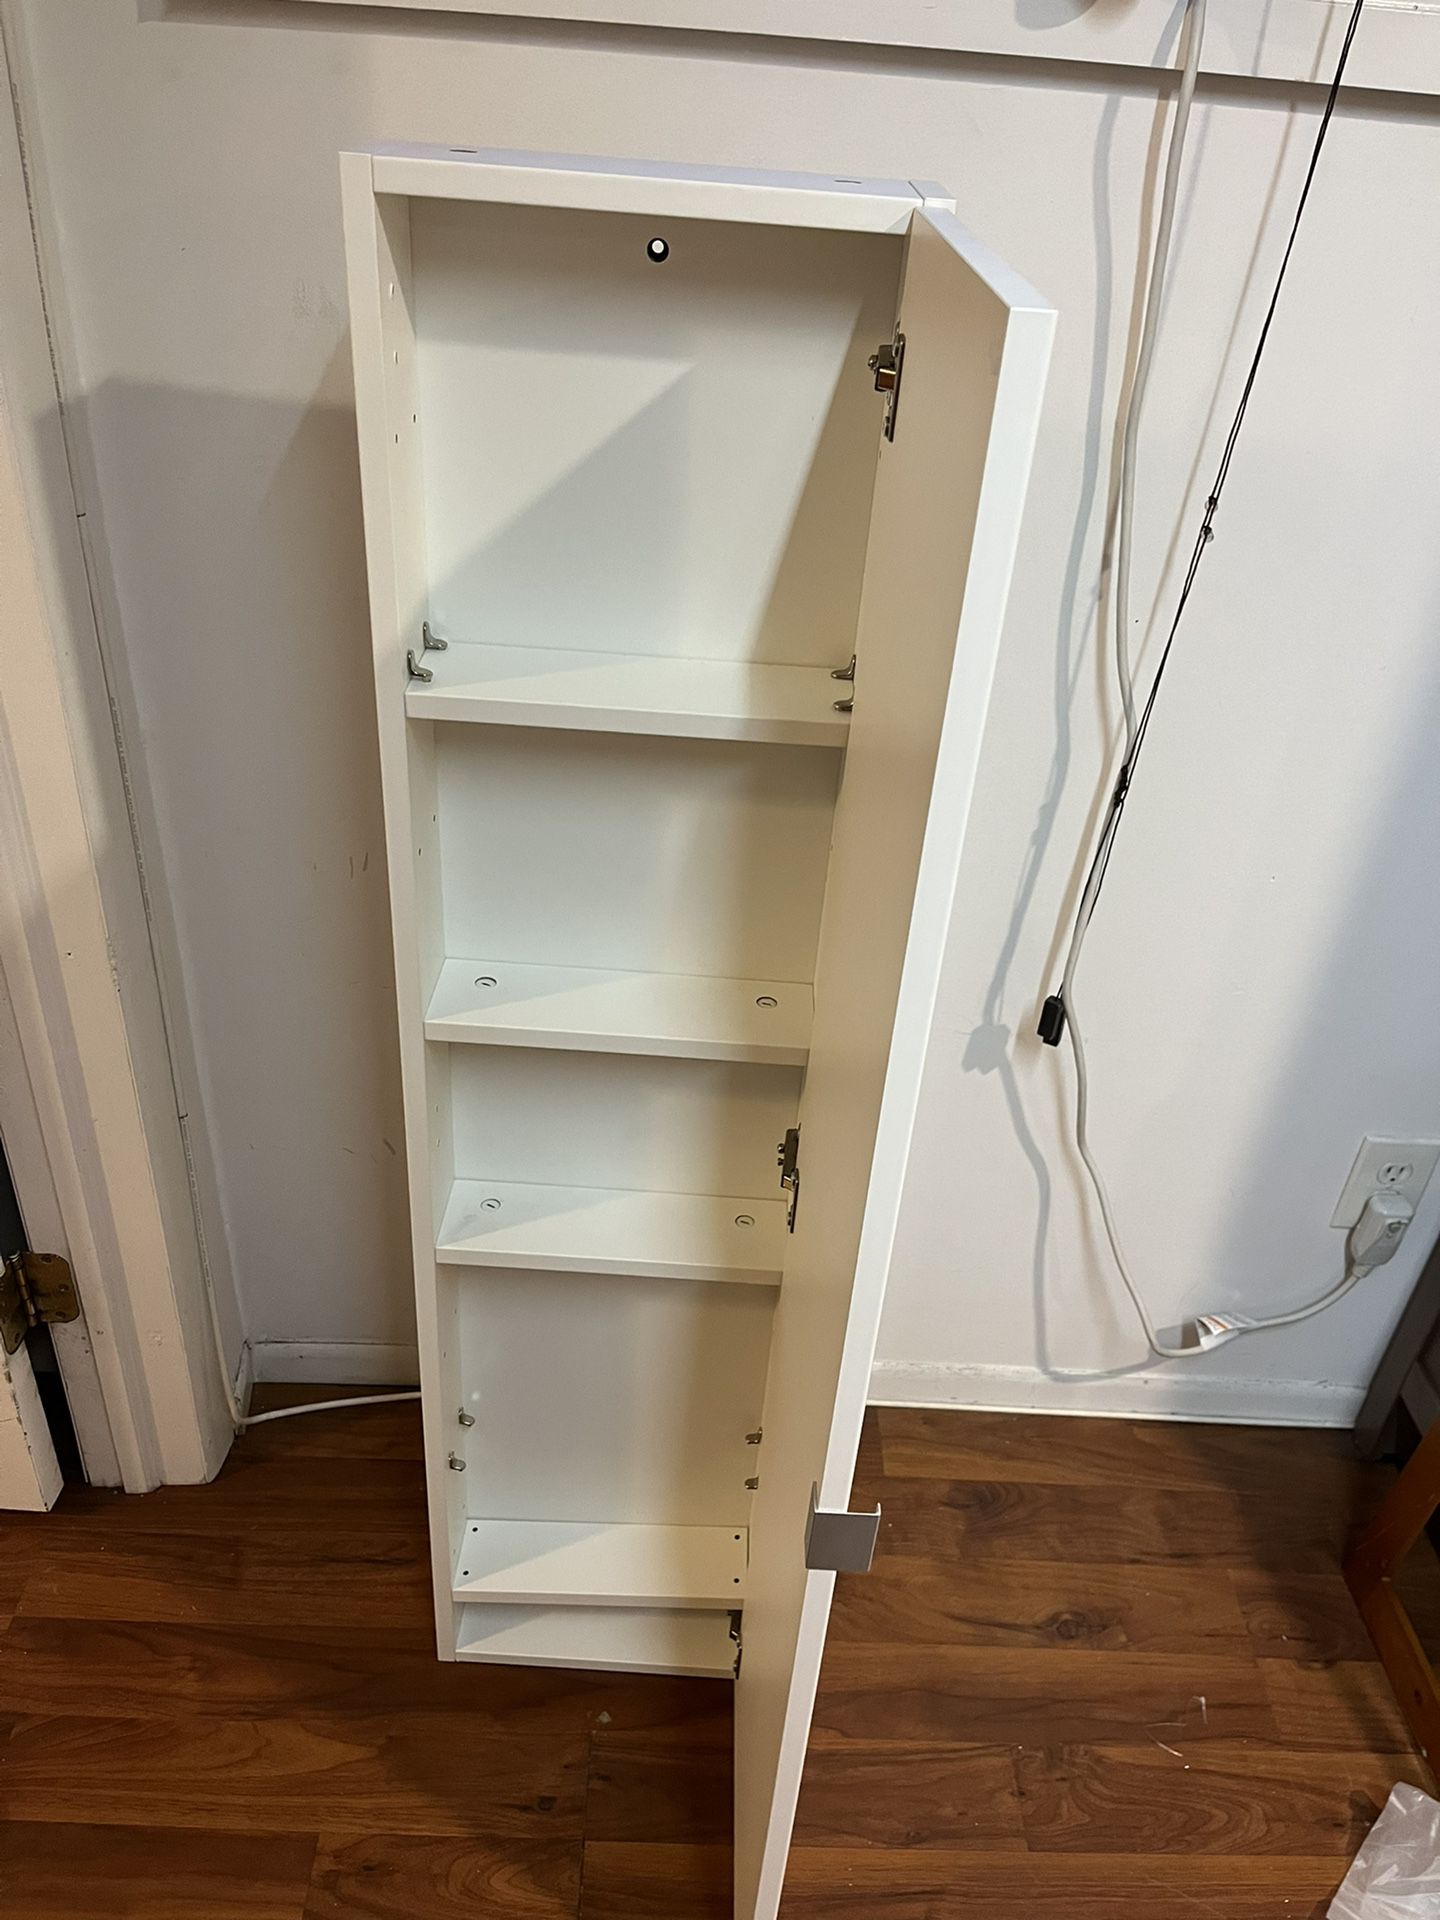 Storage Cabinet For Pedestal Sink - OBO for Sale in New York, NY - OfferUp